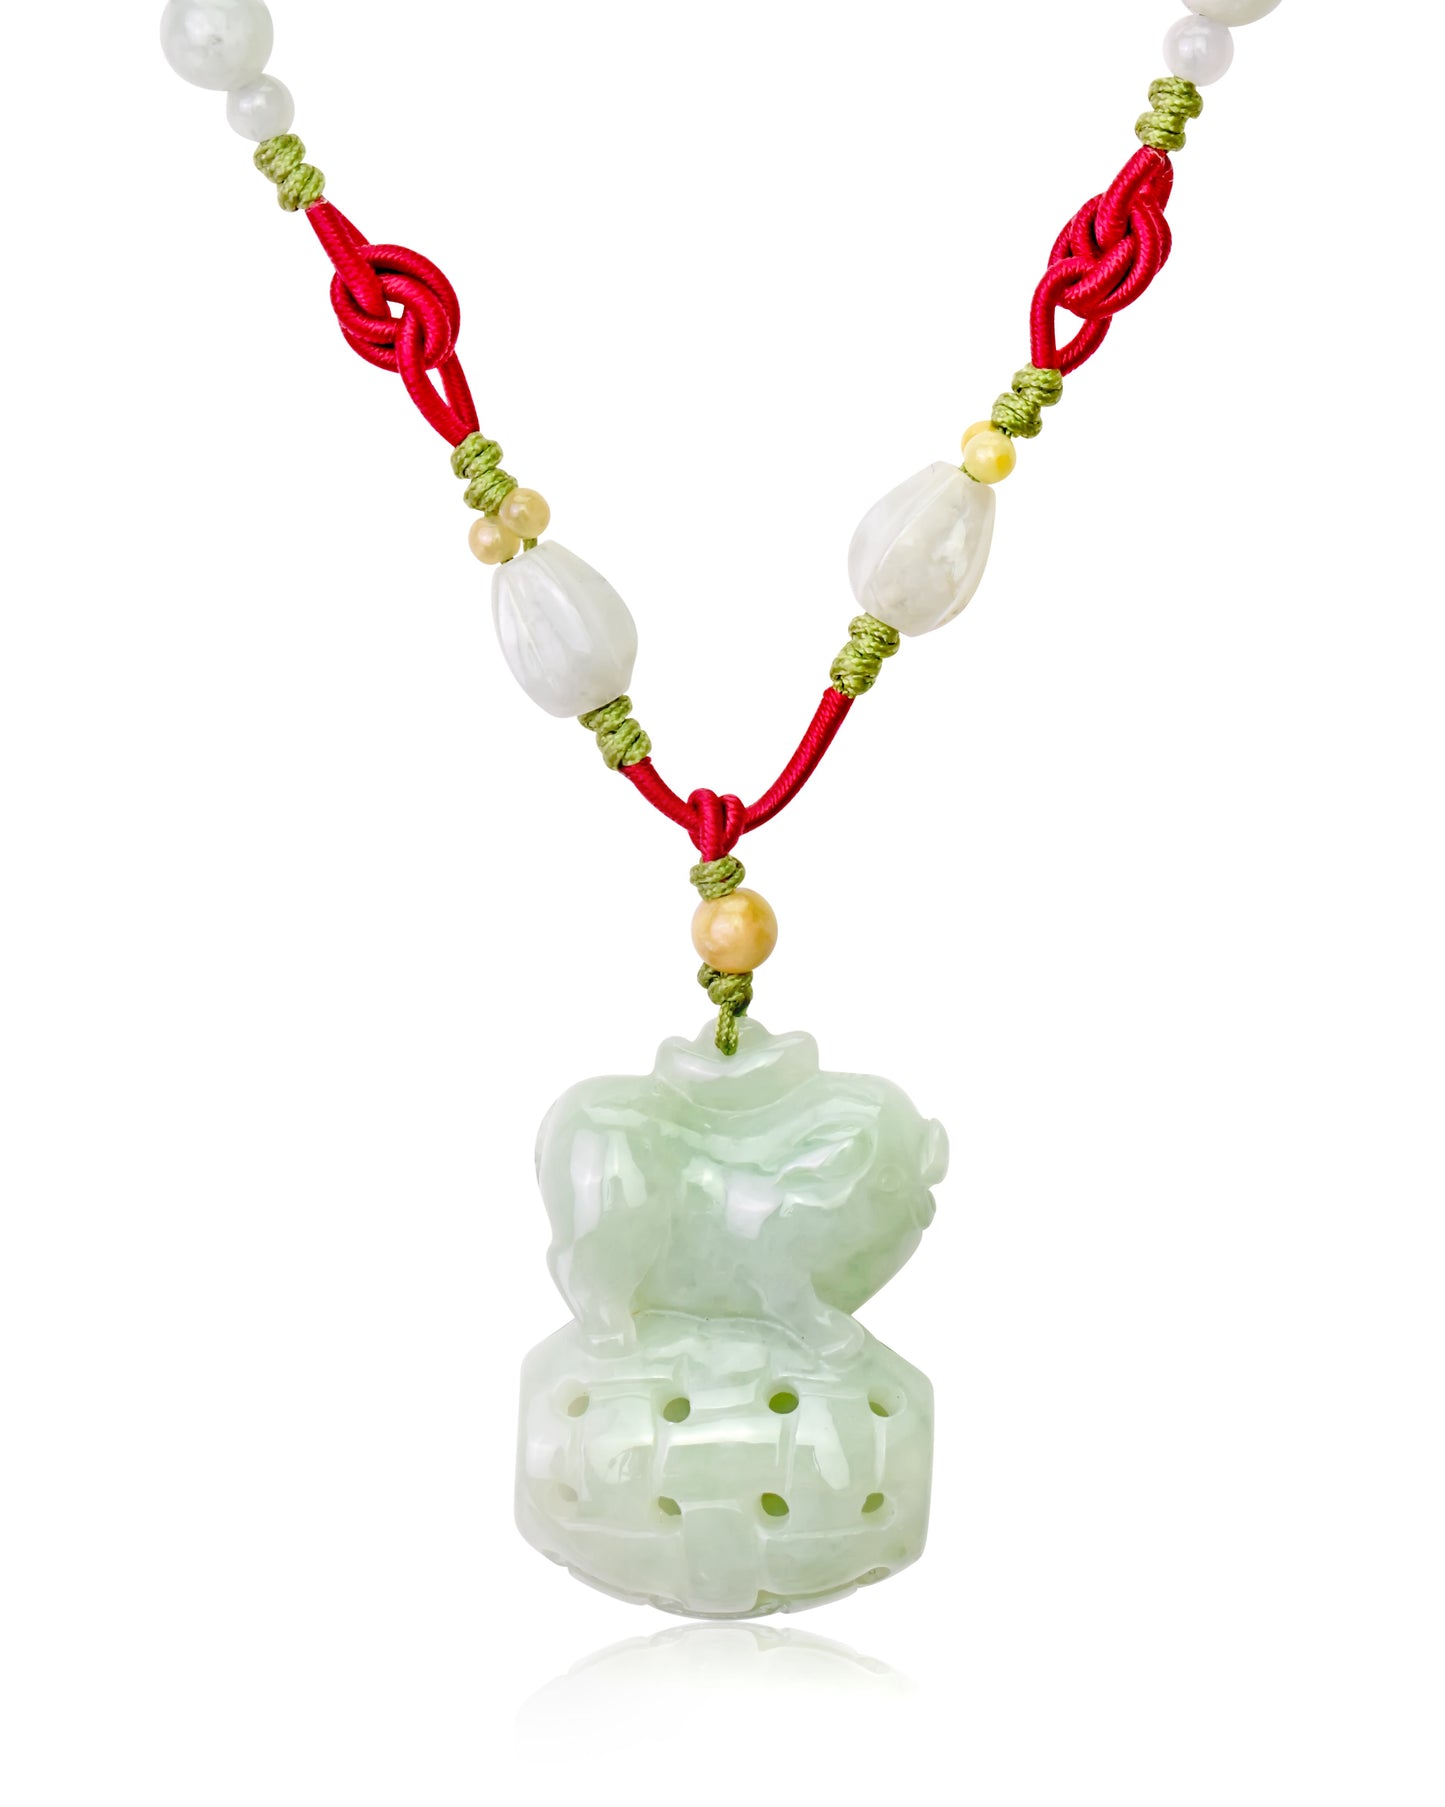 Attract Luck and Wealth with the Boar Chinese Zodiac Handmade Jade Necklace made with Sea Green Cord